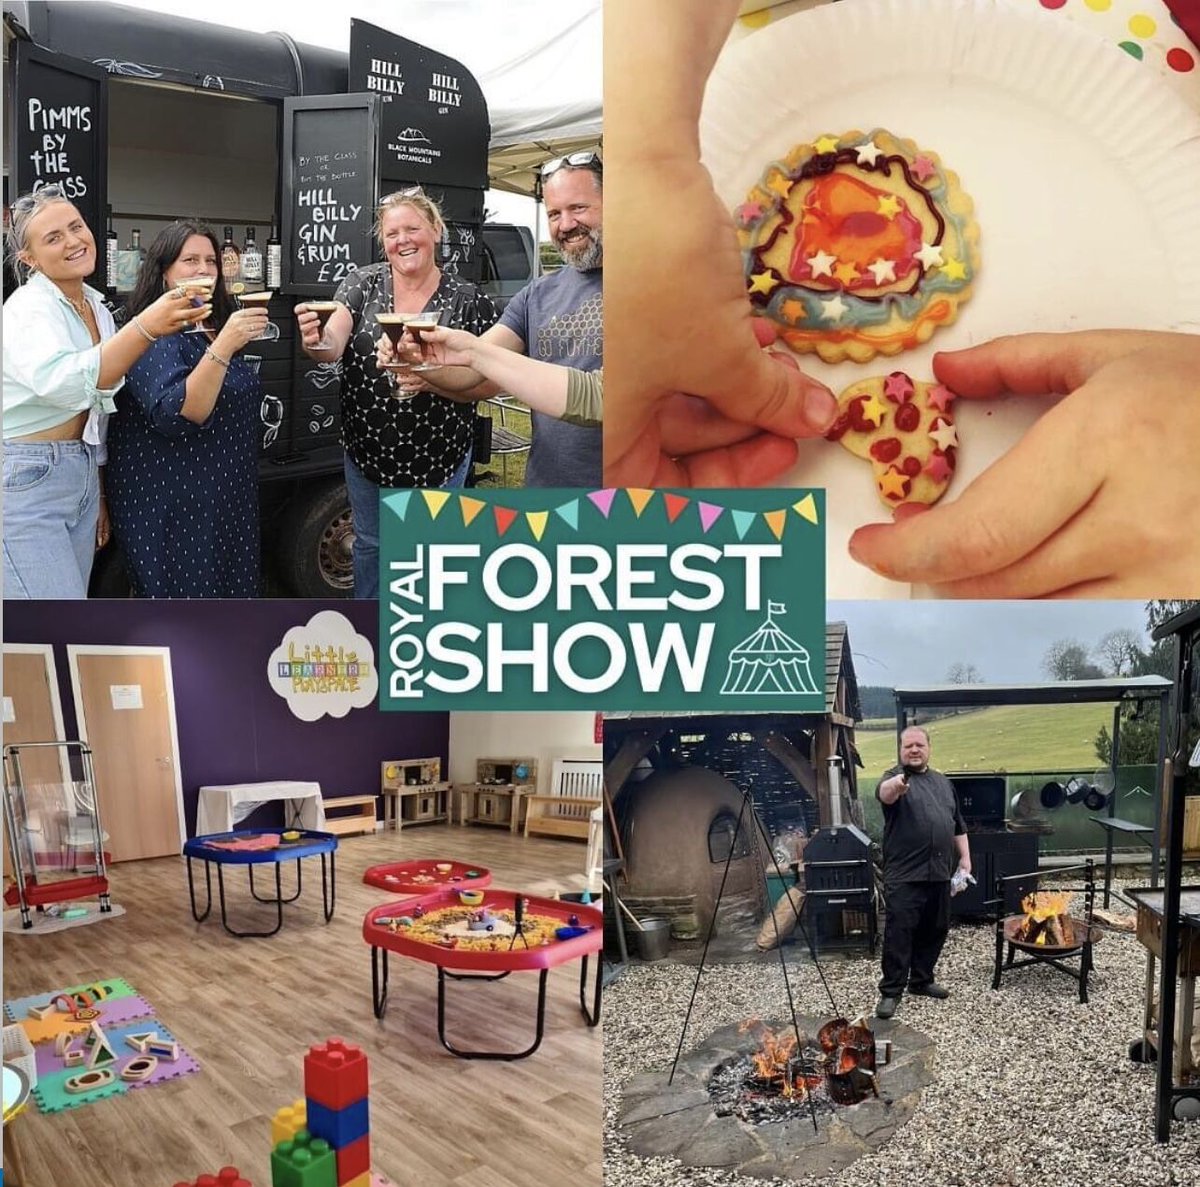 Tickets to the @royalforestshow on sale now! Visit their page for more information. A family event in the heart of the Forest of Dean. 

17th June 11am-5pm. 

#forestofdean #royalforestshow #GLOUCESTER #Gloucestershire #forestshow #Gloucestershireevents